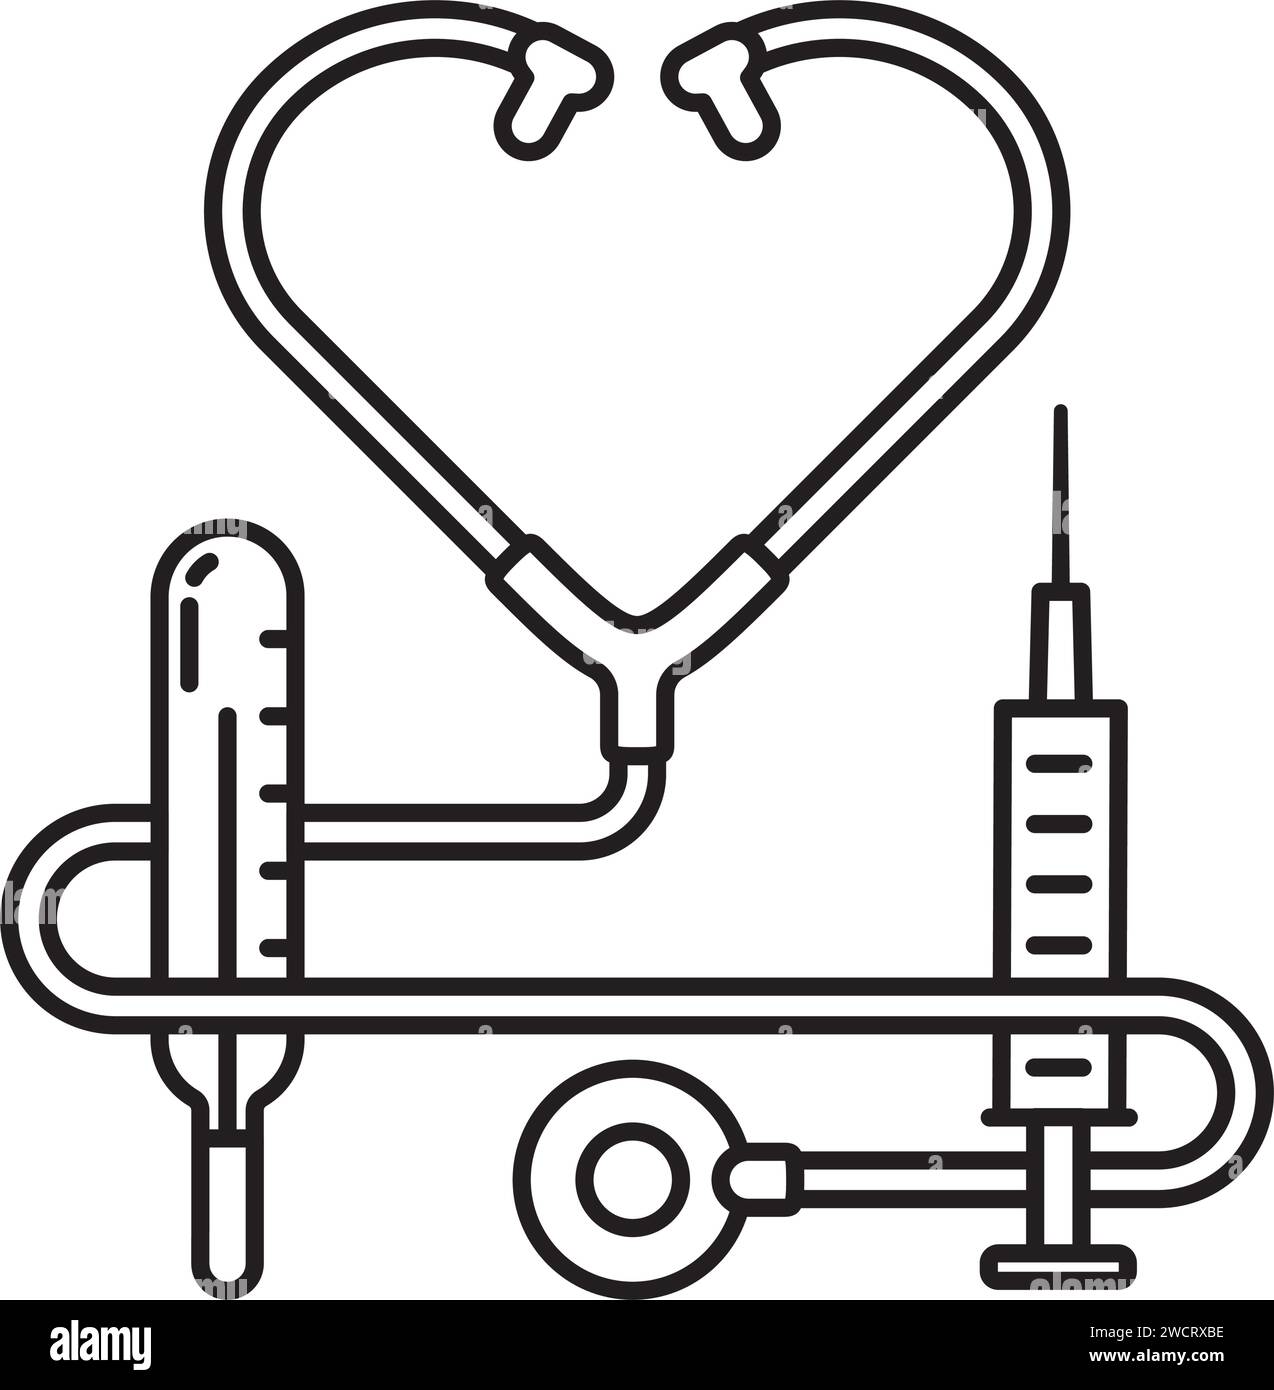 Stethoscope, thermometer and syringe vector line icon for Doctors Day on March 30. Medical tzools symbol. Stock Vector